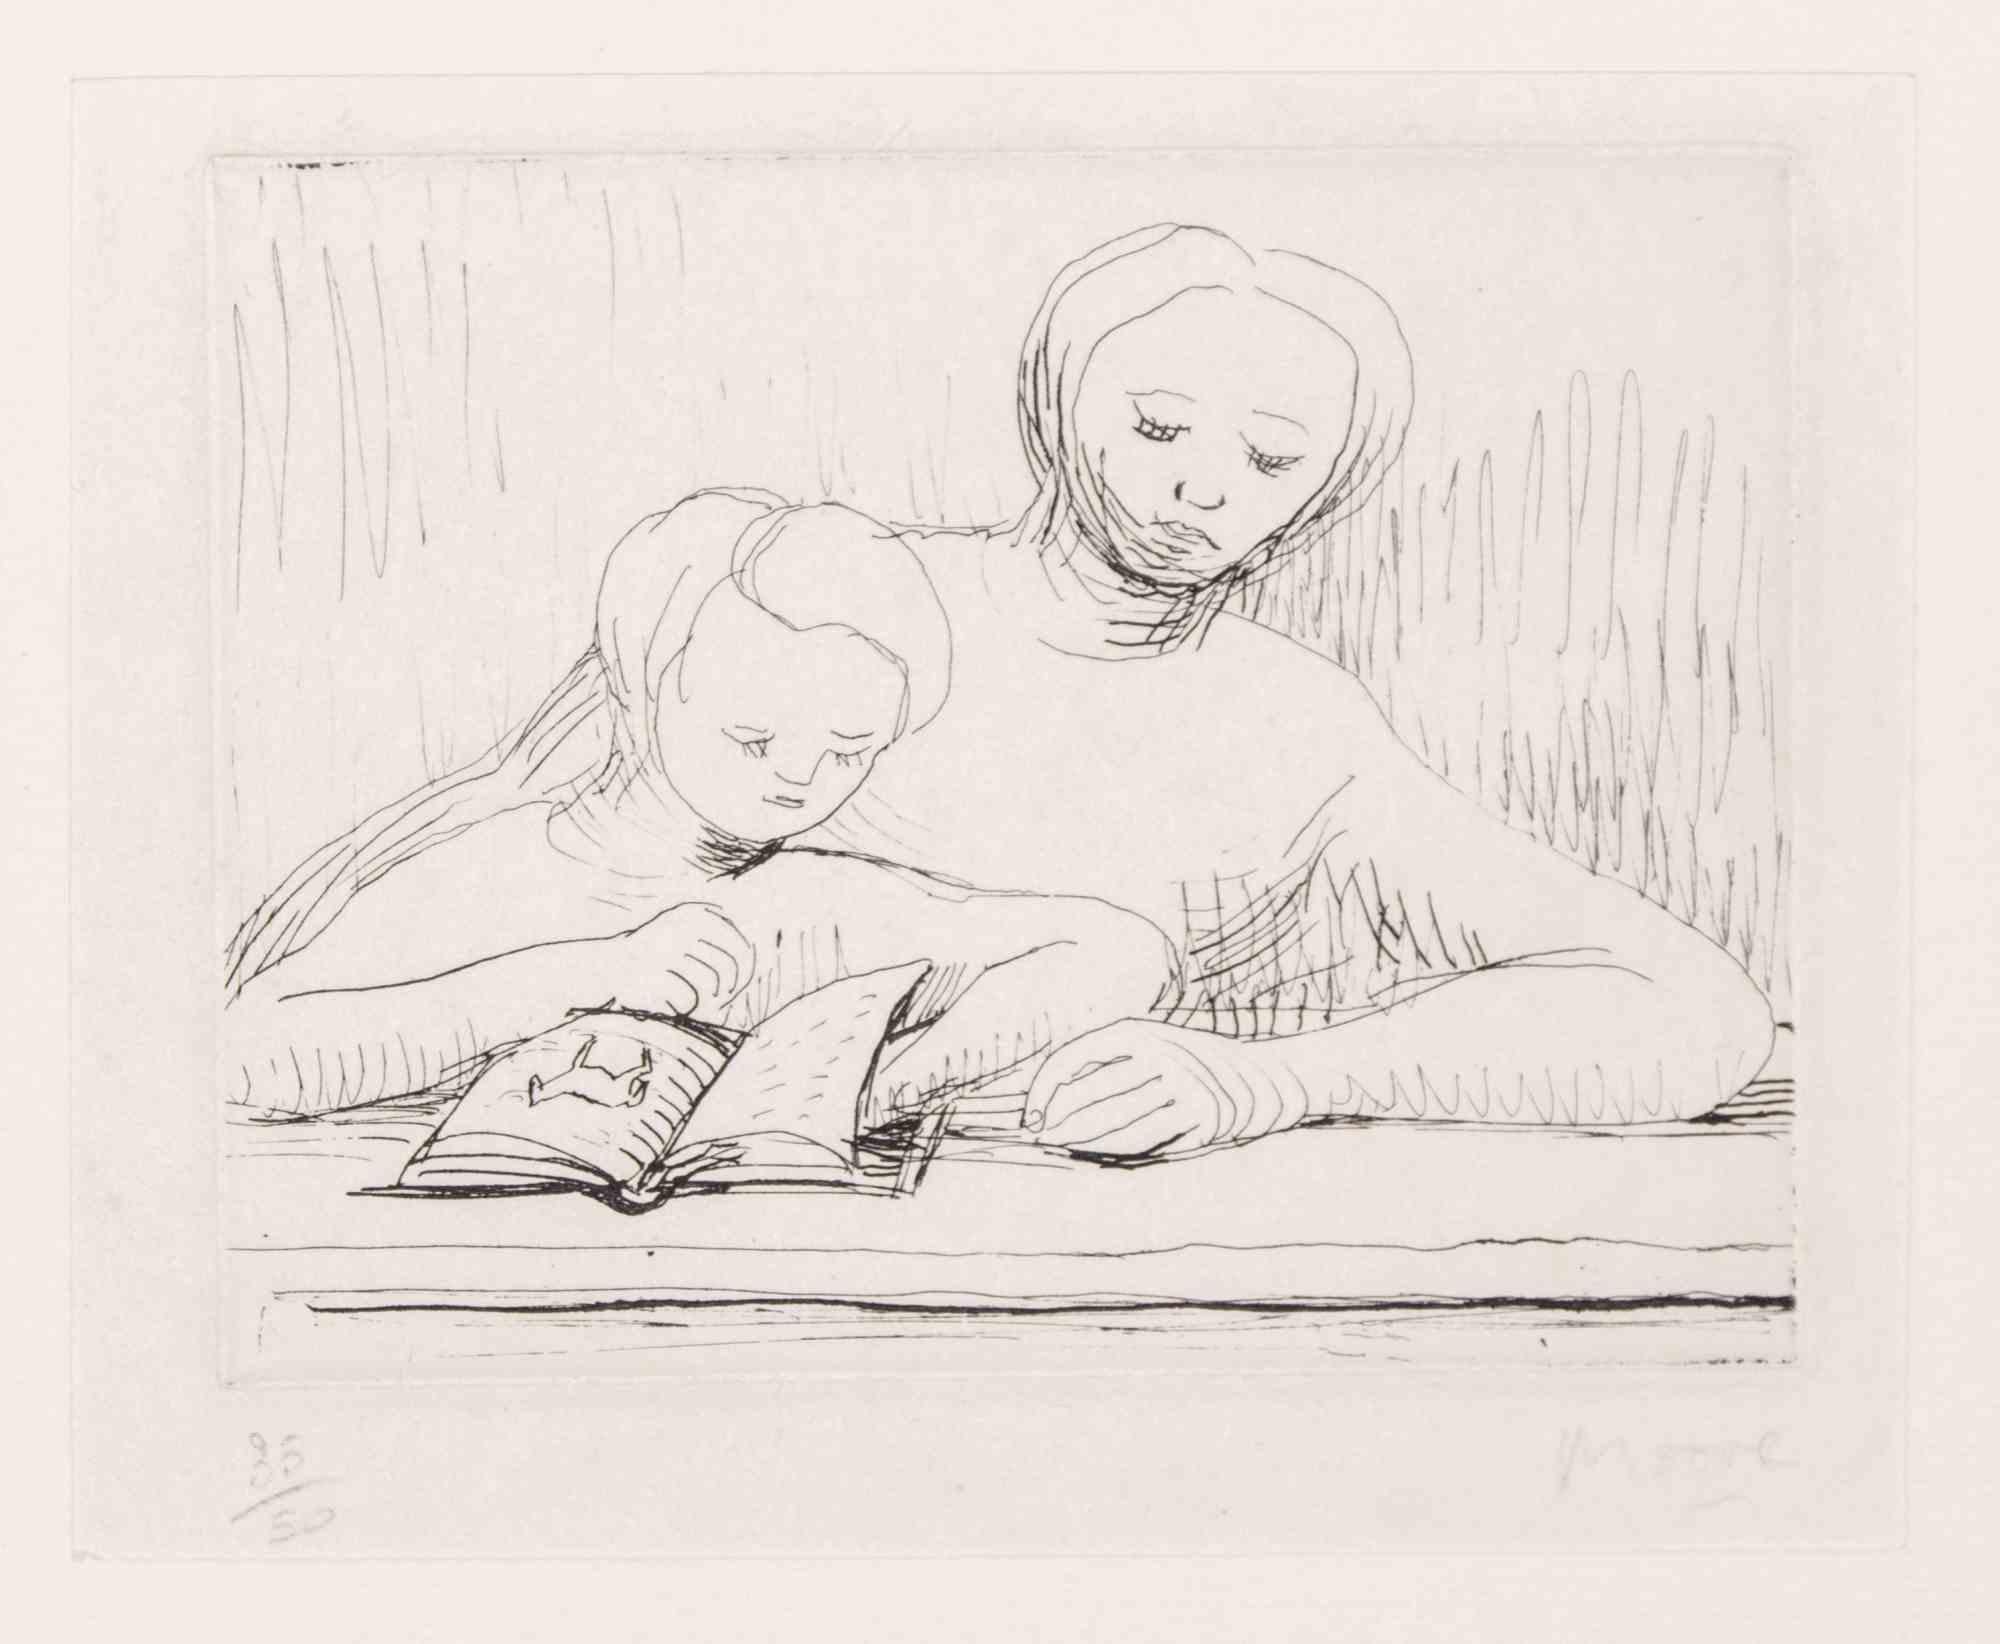 Picture Book - Etching by Henry Moore - 1967